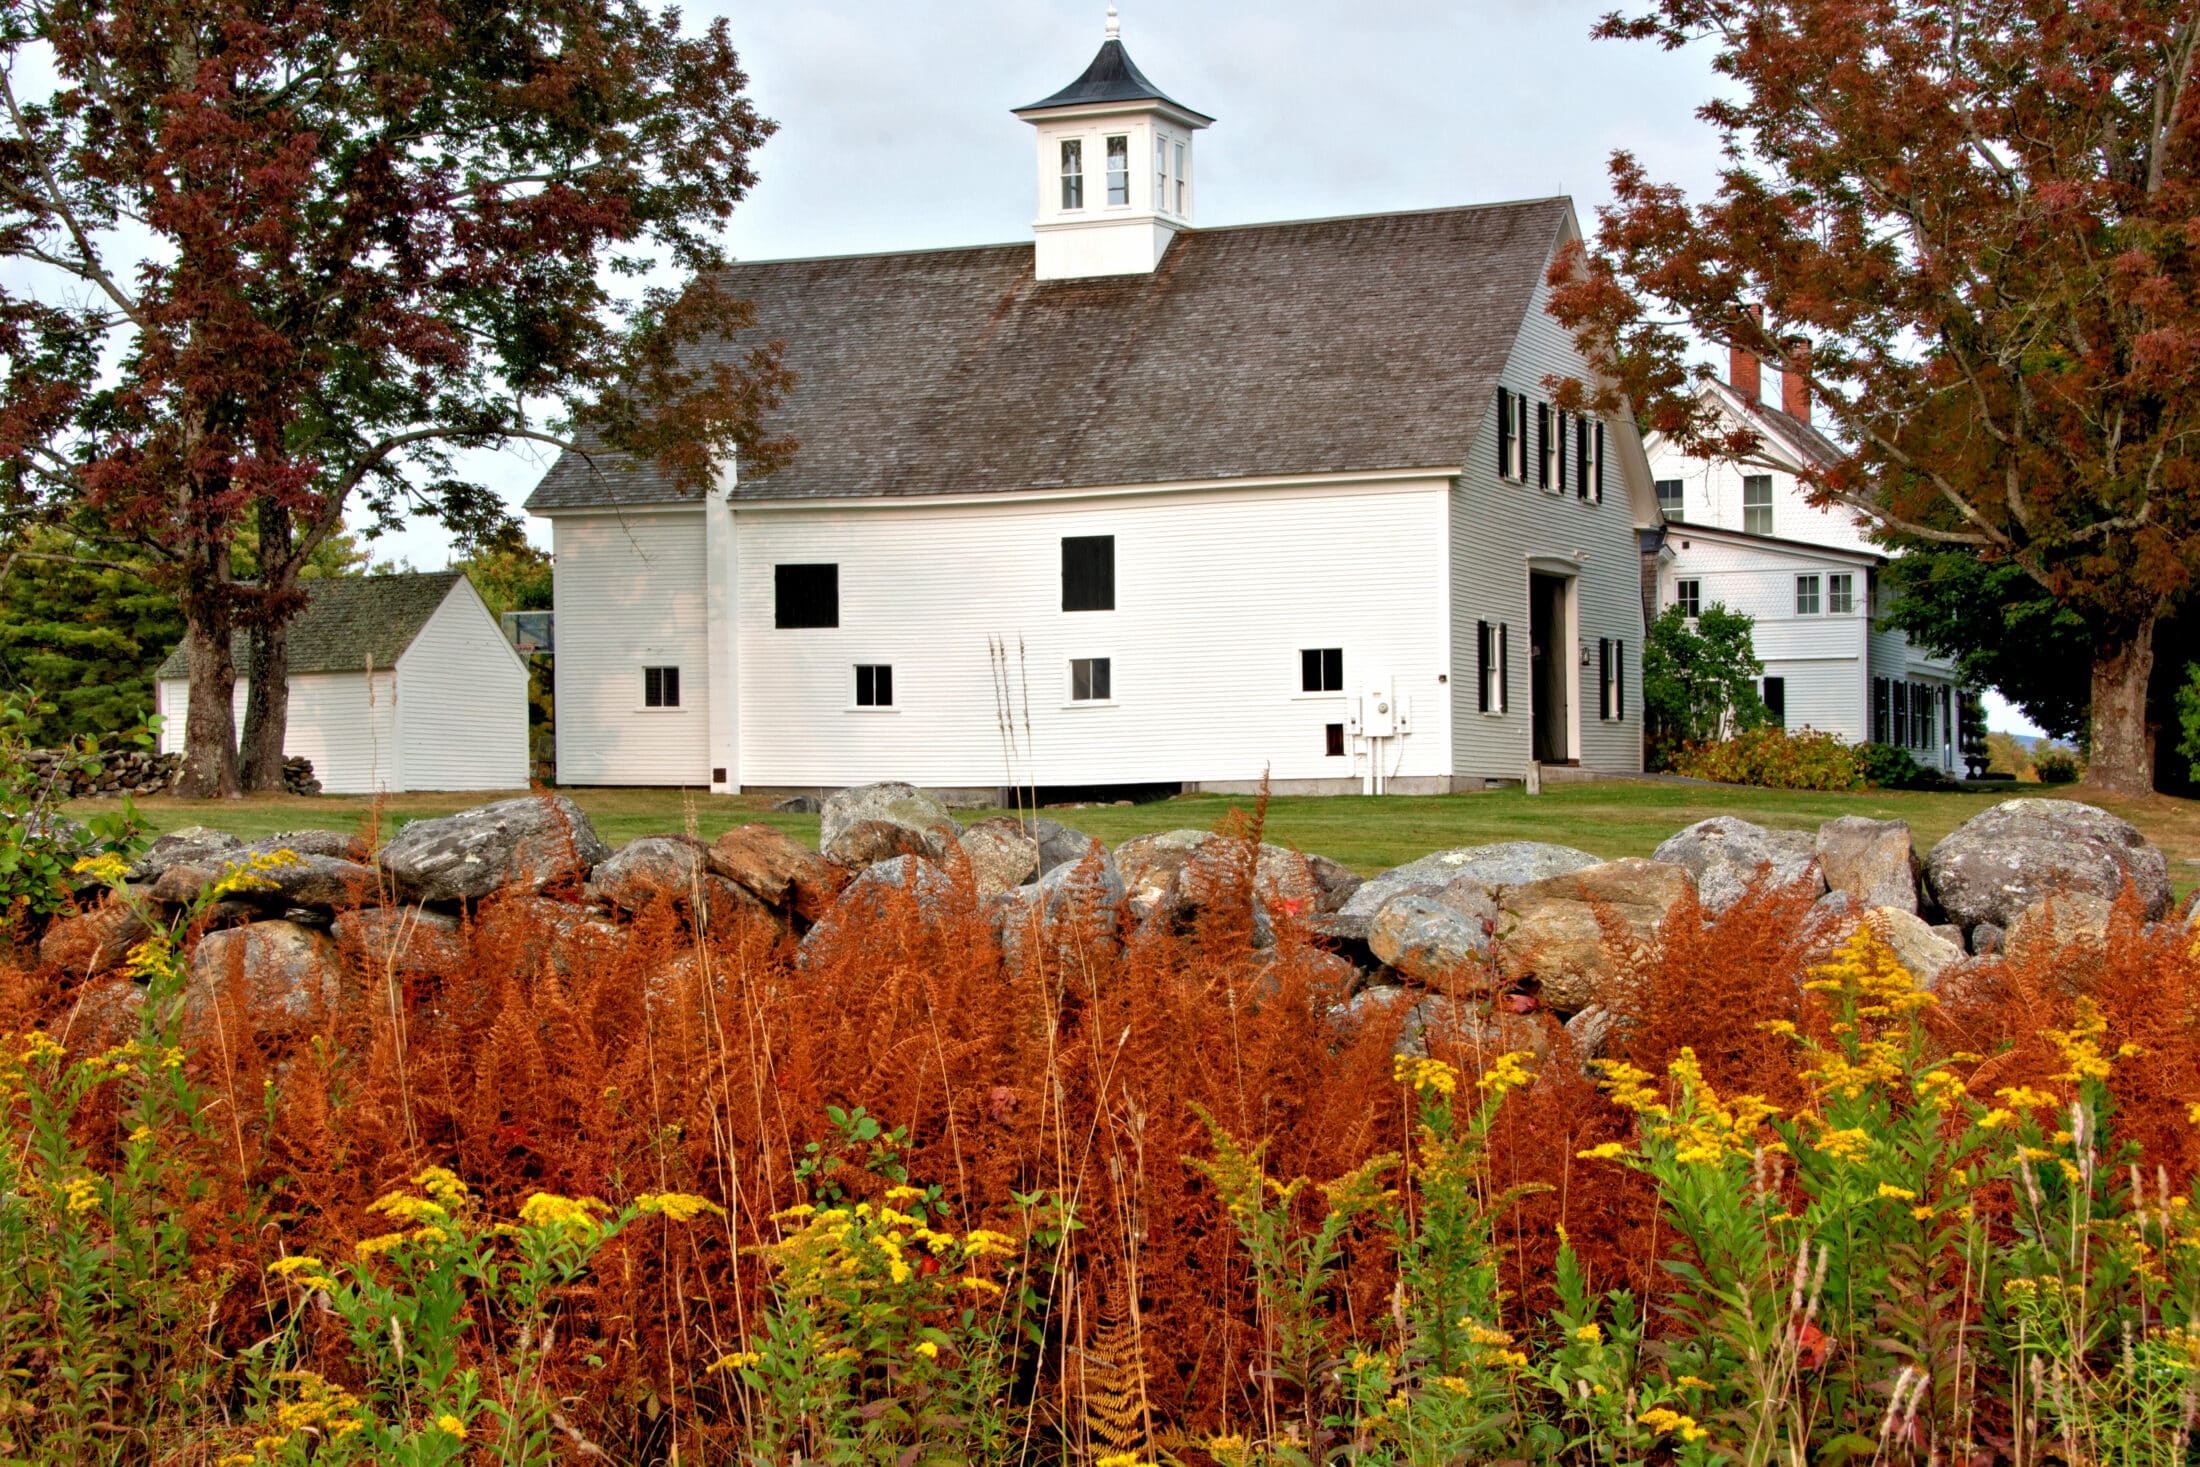 Horse farm in Jaffrey, New Hampshire Colorful New England autumn scene with vibrant bronze colored fern leaves, goldenrod, old stone wall, and white barn with cupola